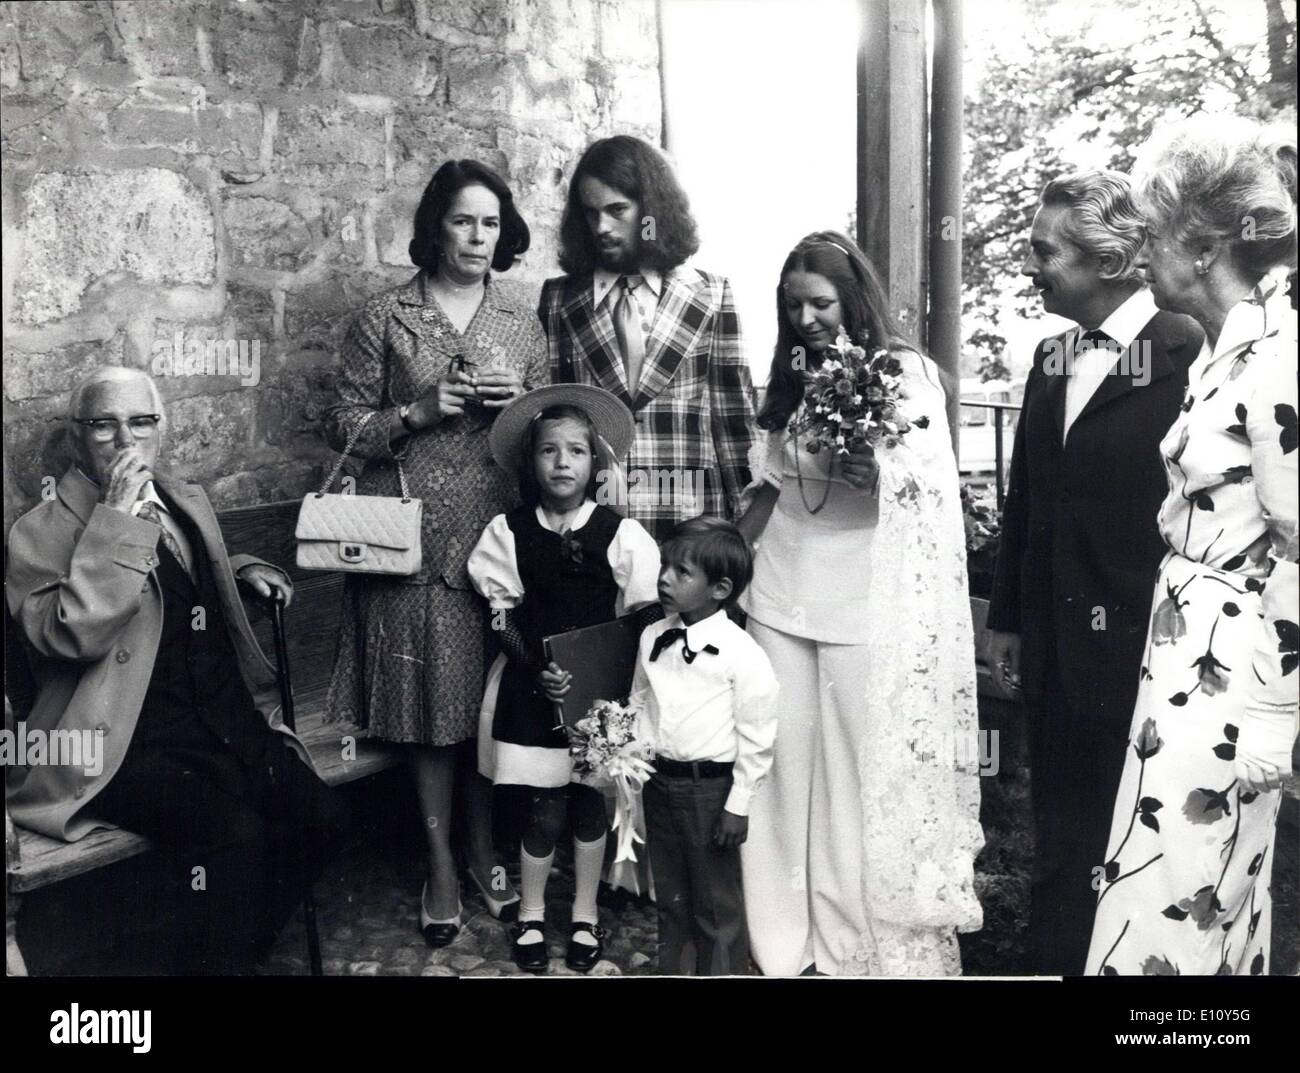 Aug. 11, 1974 - Marriage of Young Chaplin: At Vevey, Switzerland, a new girl entered in Chaplin - family. Saturday School-teacher Sandra Guignard married Charlie's 21 year old son Eugene. Picture shows Charlie Chaplin Sen. (left) with wife Oana, assisitng marriage ceremonies of son Eigene anddaughter-in law Sandra(right) Stock Photo